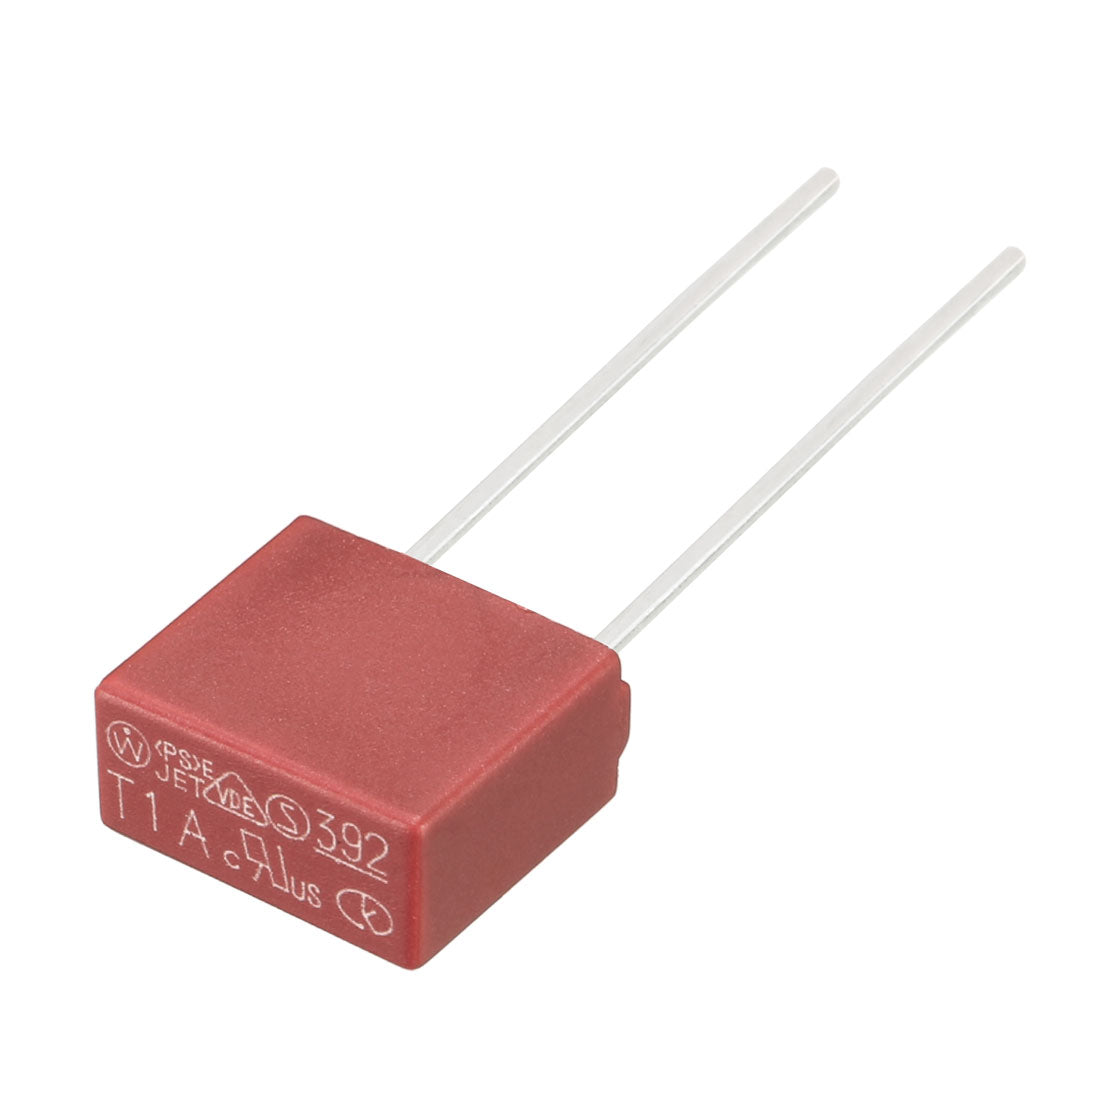 uxcell Uxcell 20Pcs DIP Mounted Miniature Square Slow Blow Micro Fuse T1A 1A 250V Red